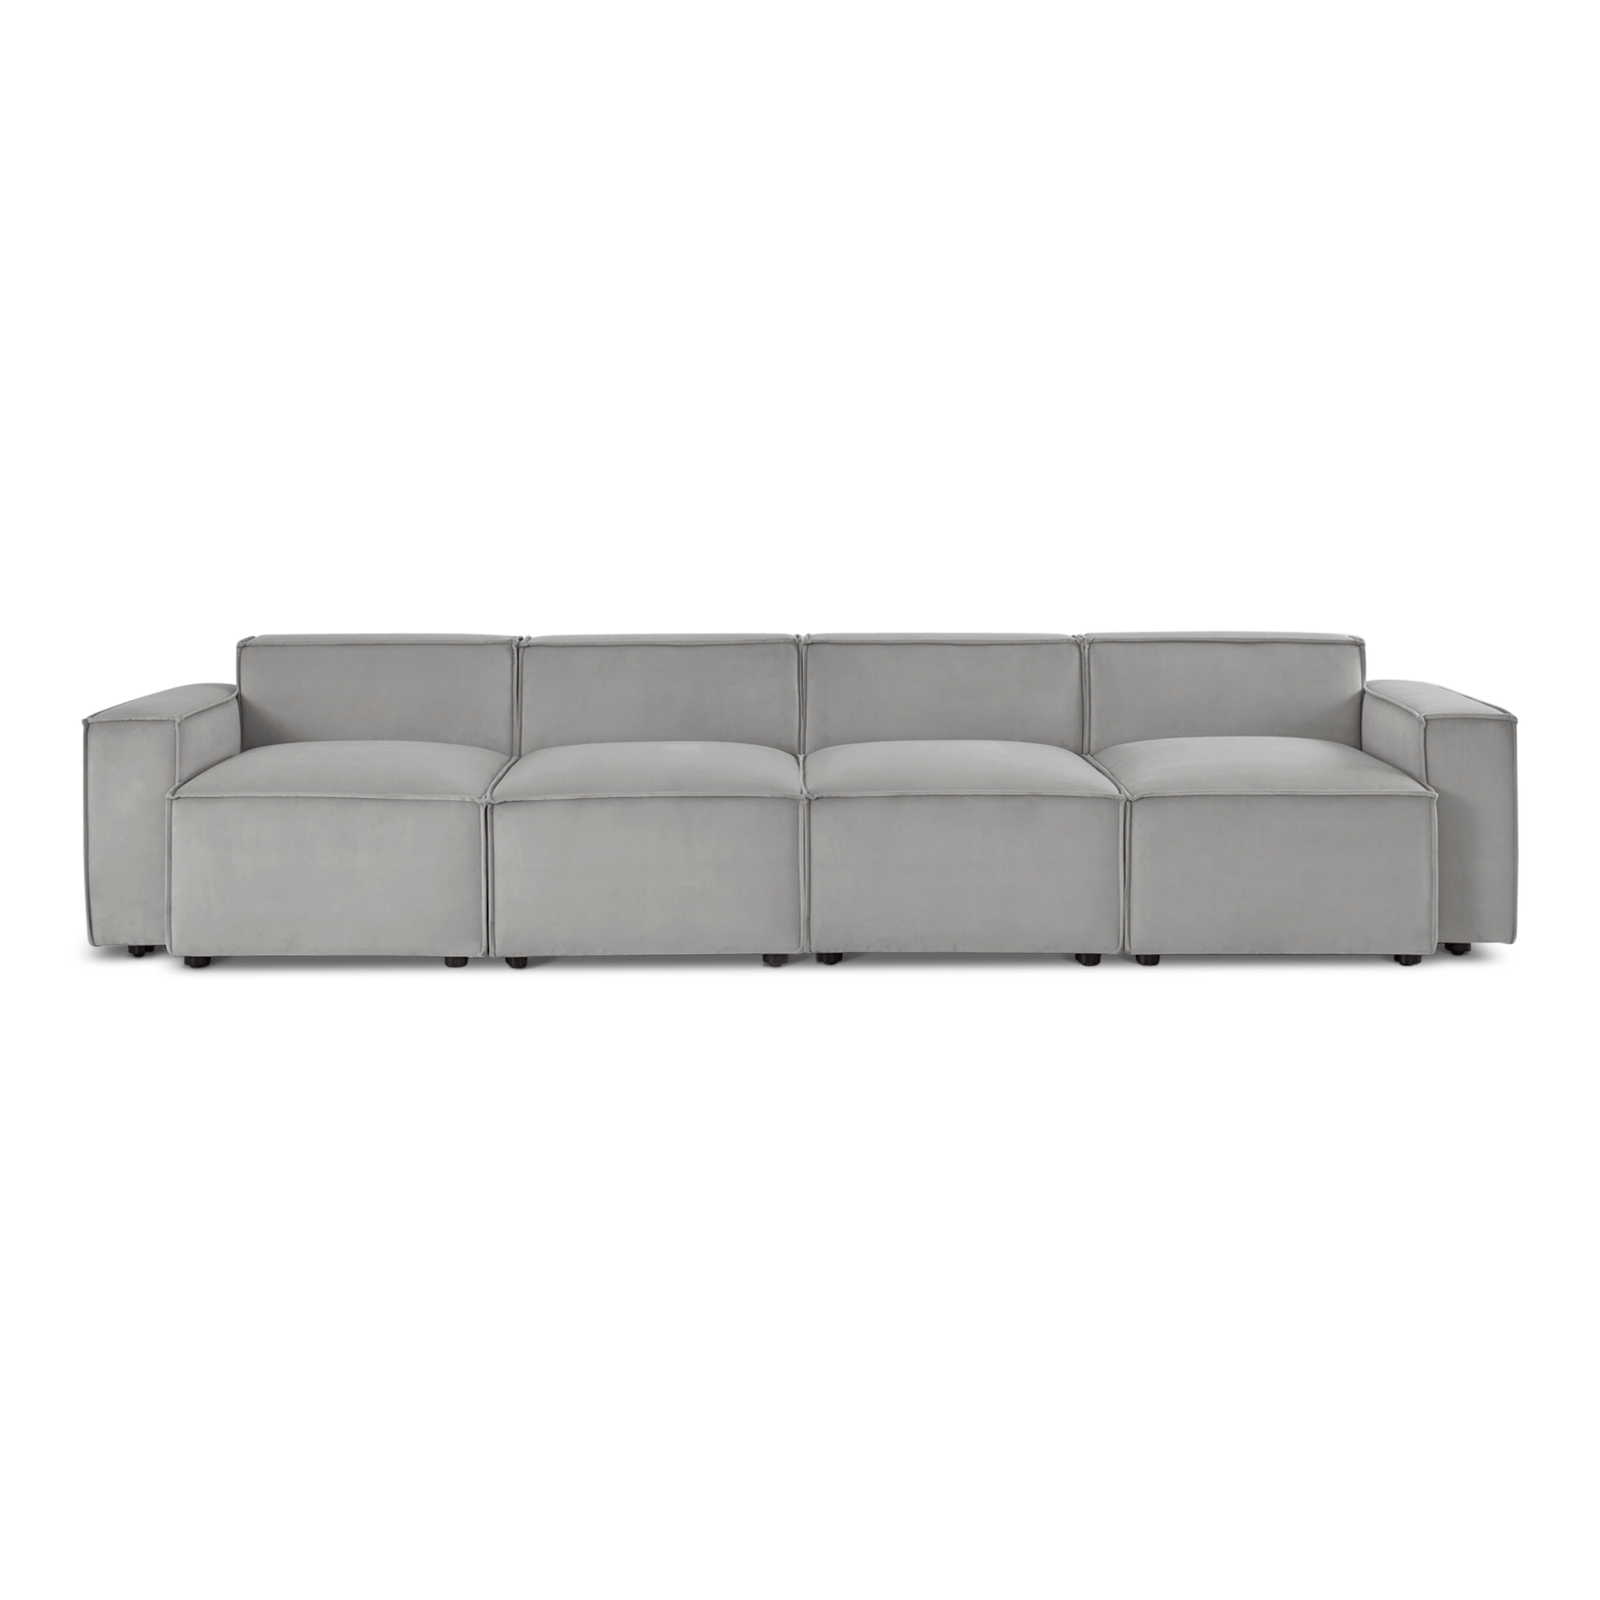 Swyft Model 03 4 Seater Sofa - 48HR DELIVERY